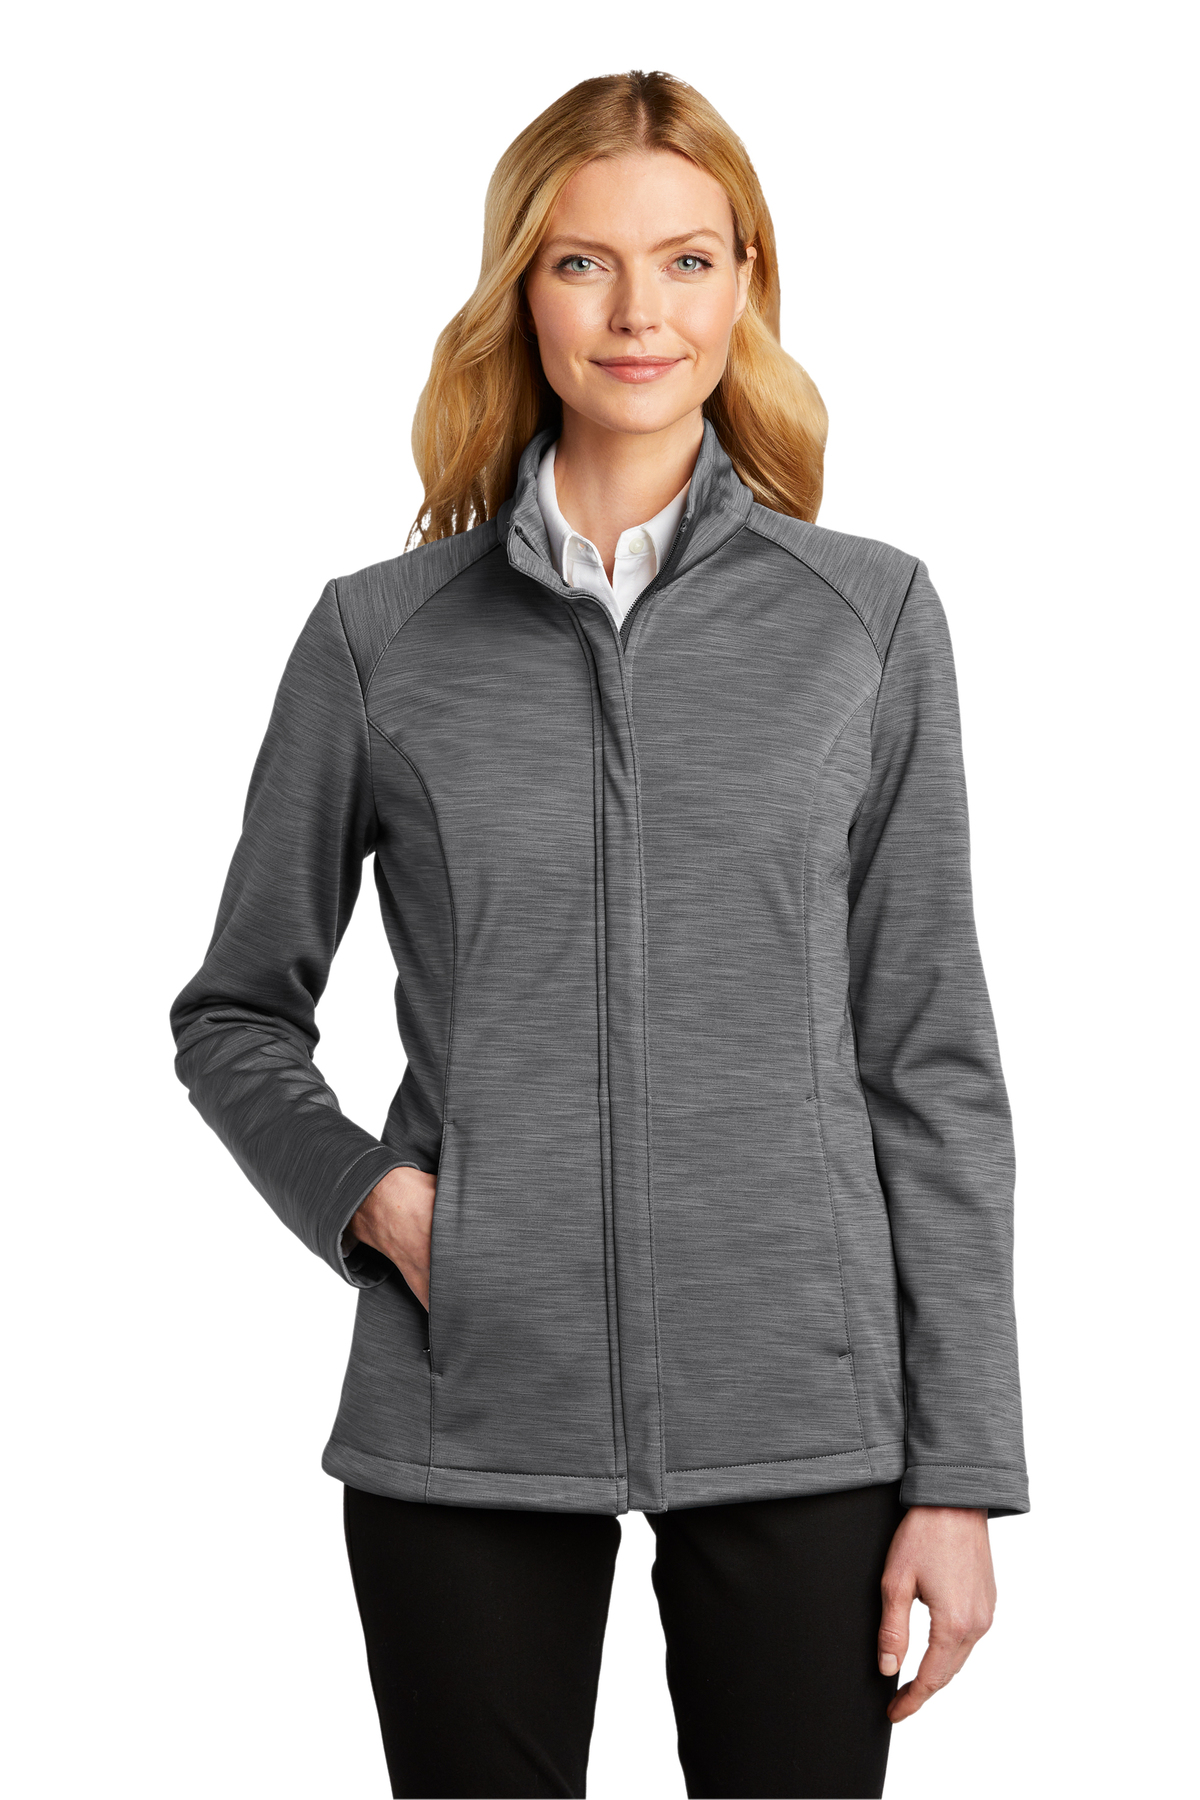 Port Authority Embroidered Women's Stream Soft Shell Jacket - Queensboro